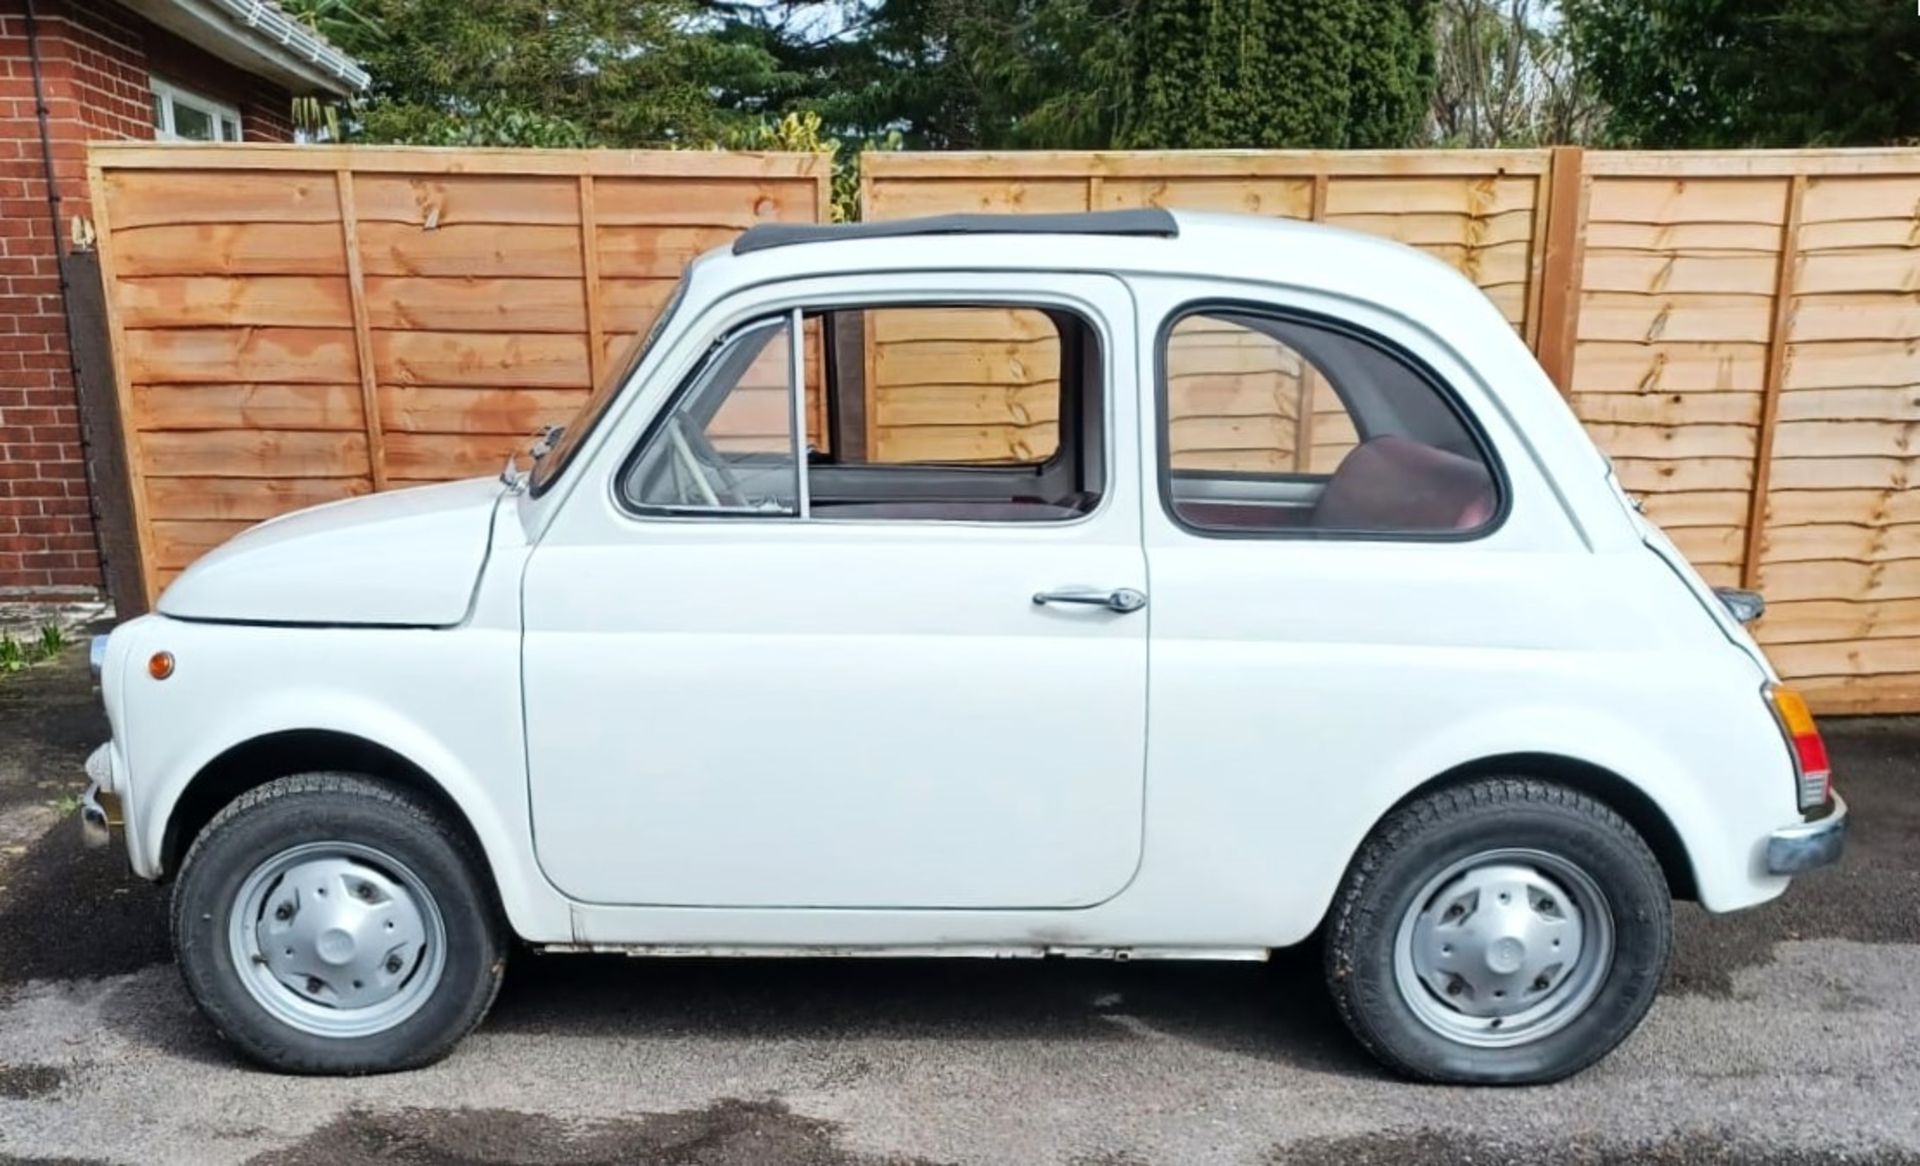 1965 FIAT 500F SALOON Registration Number: TEU 235C Chassis Number: 110F0954214 Recorded Mileage: